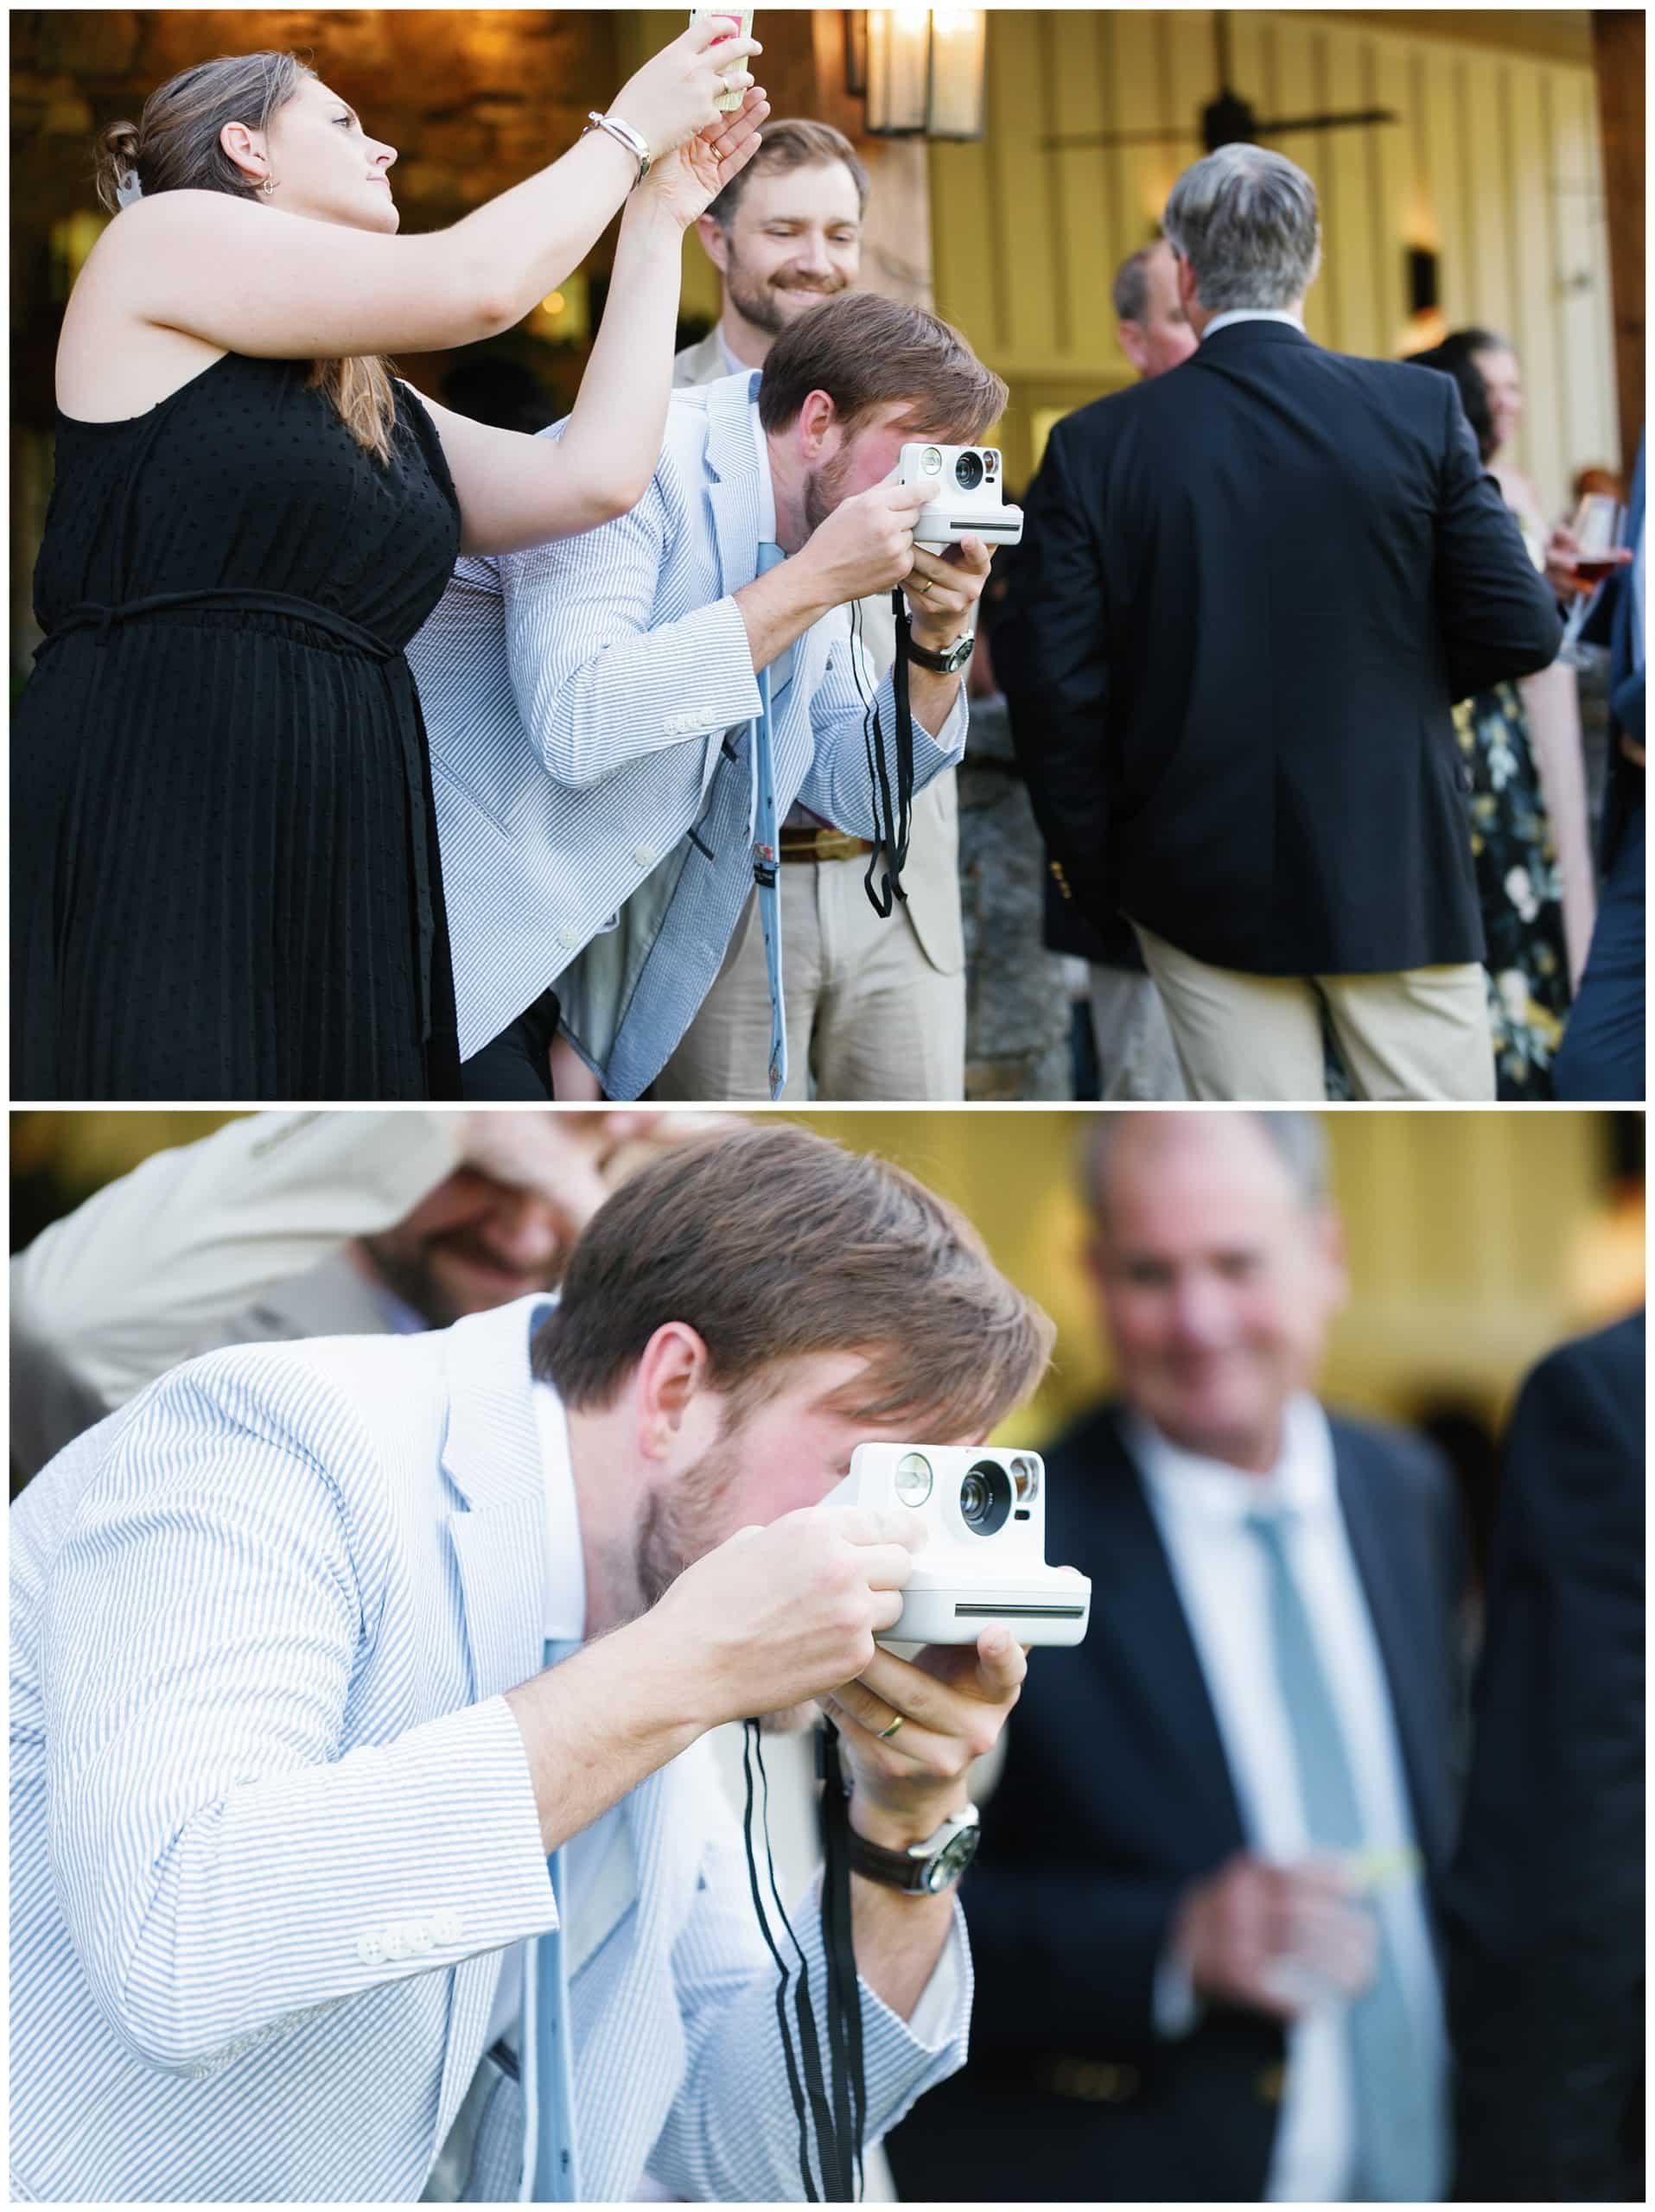 A man takes a picture with a camera at a wedding reception.